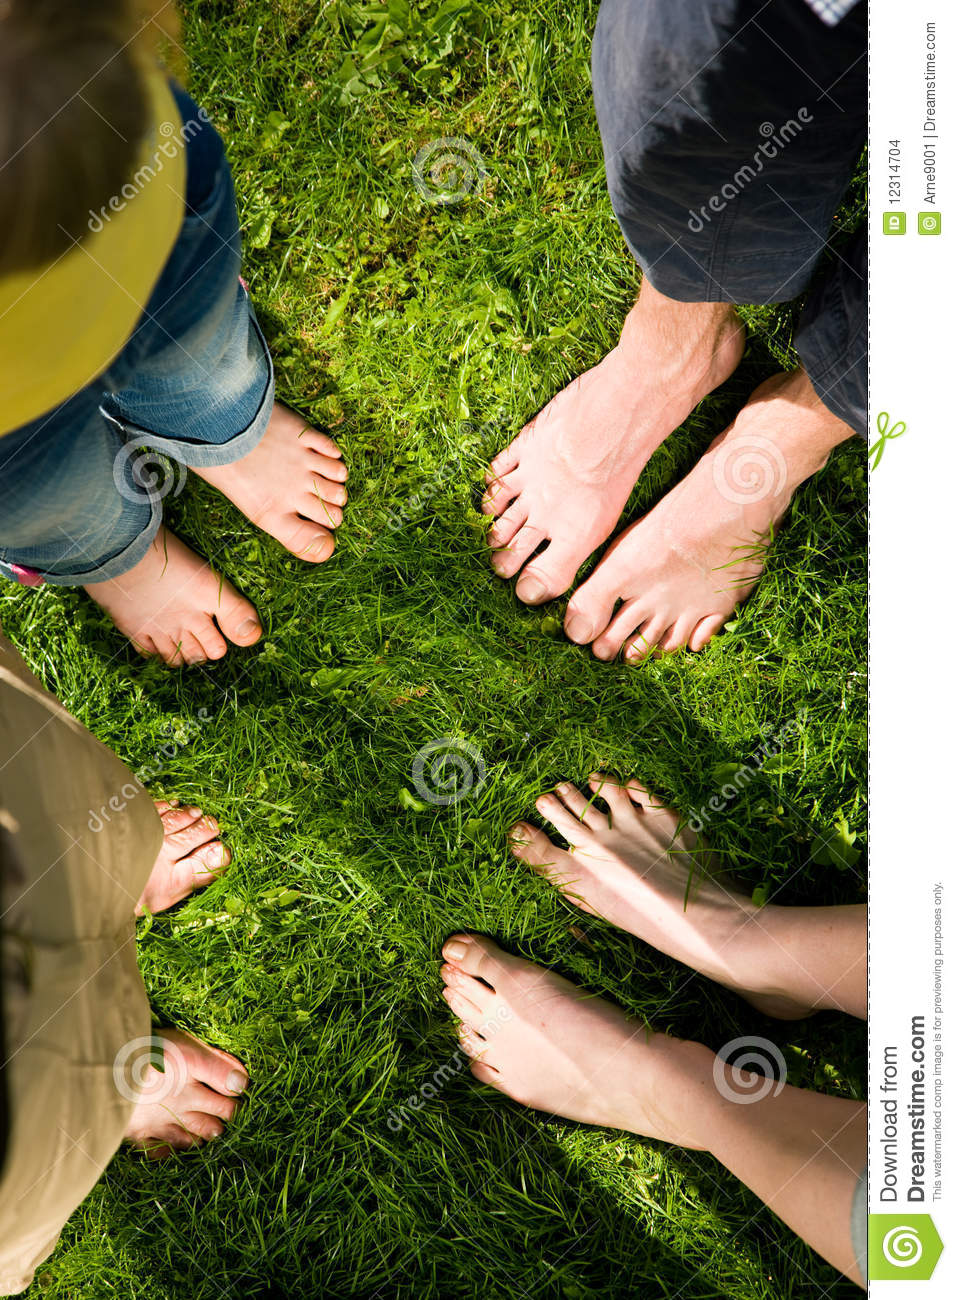 Healthy Feet Series  Feet Of Men And Women Of Different Ages Standing